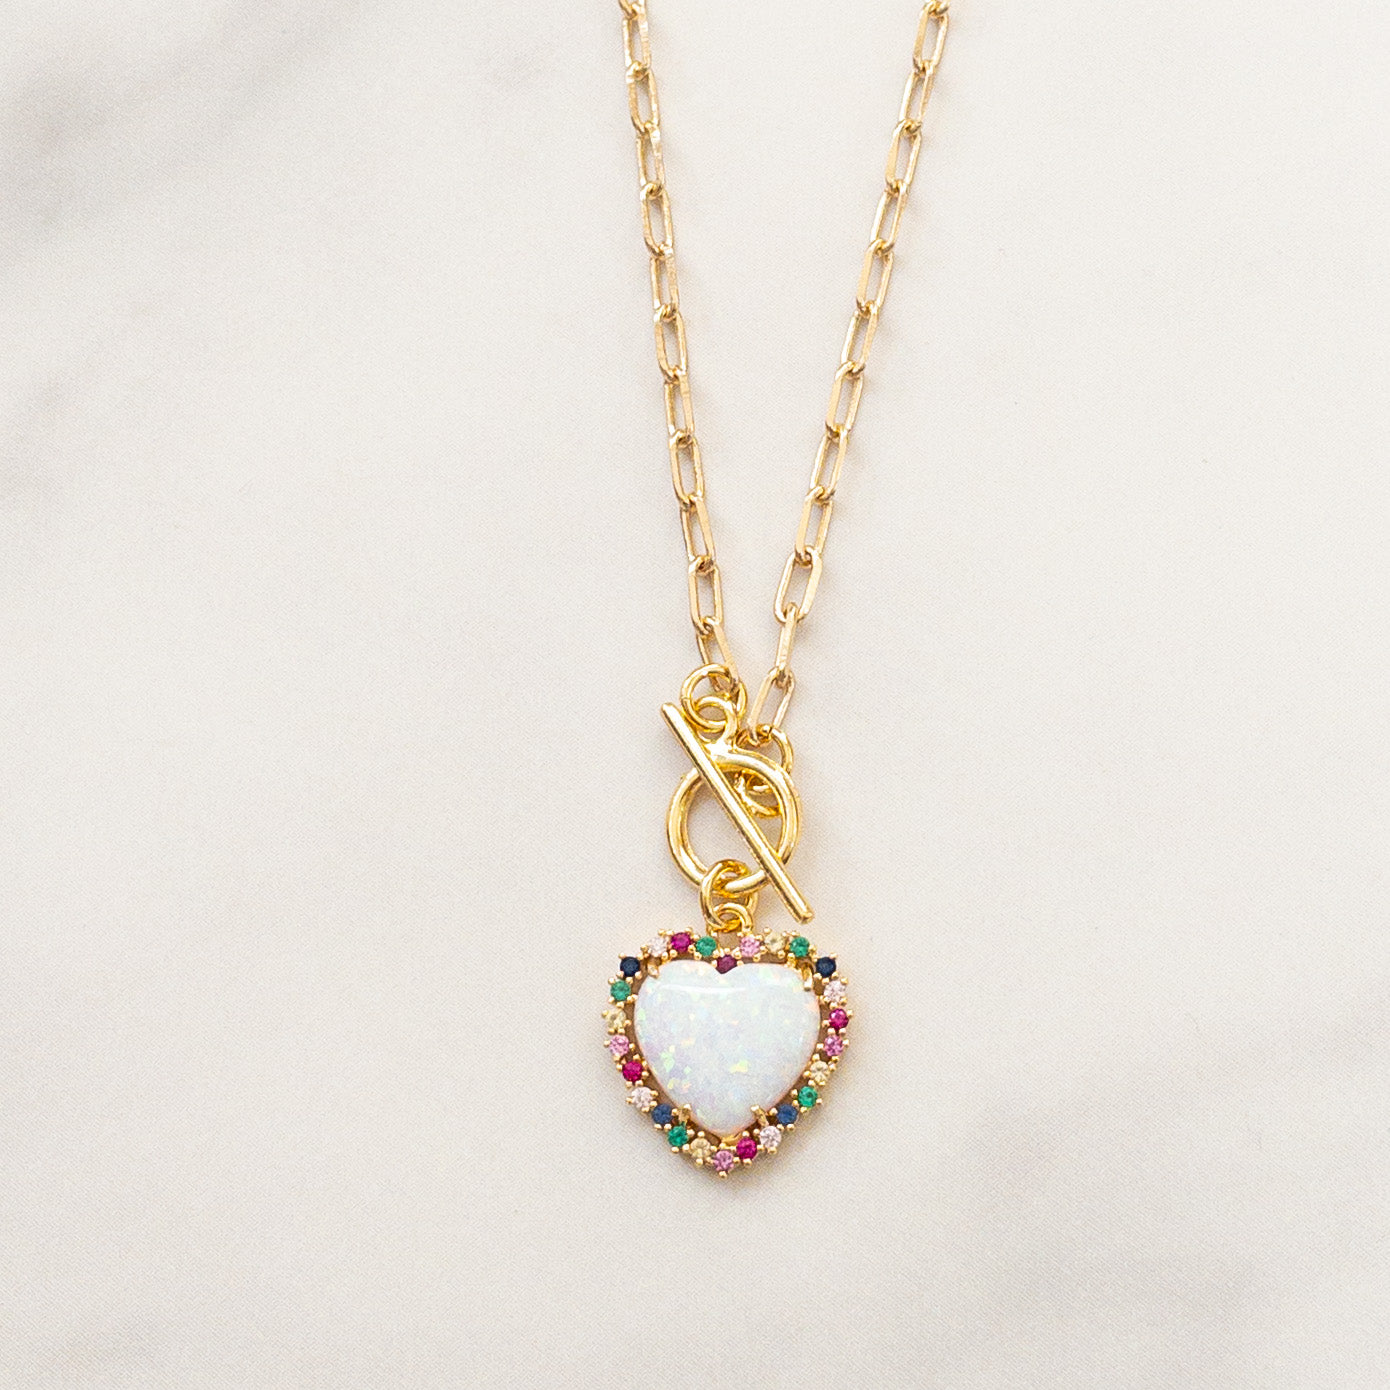 The Amore Necklace